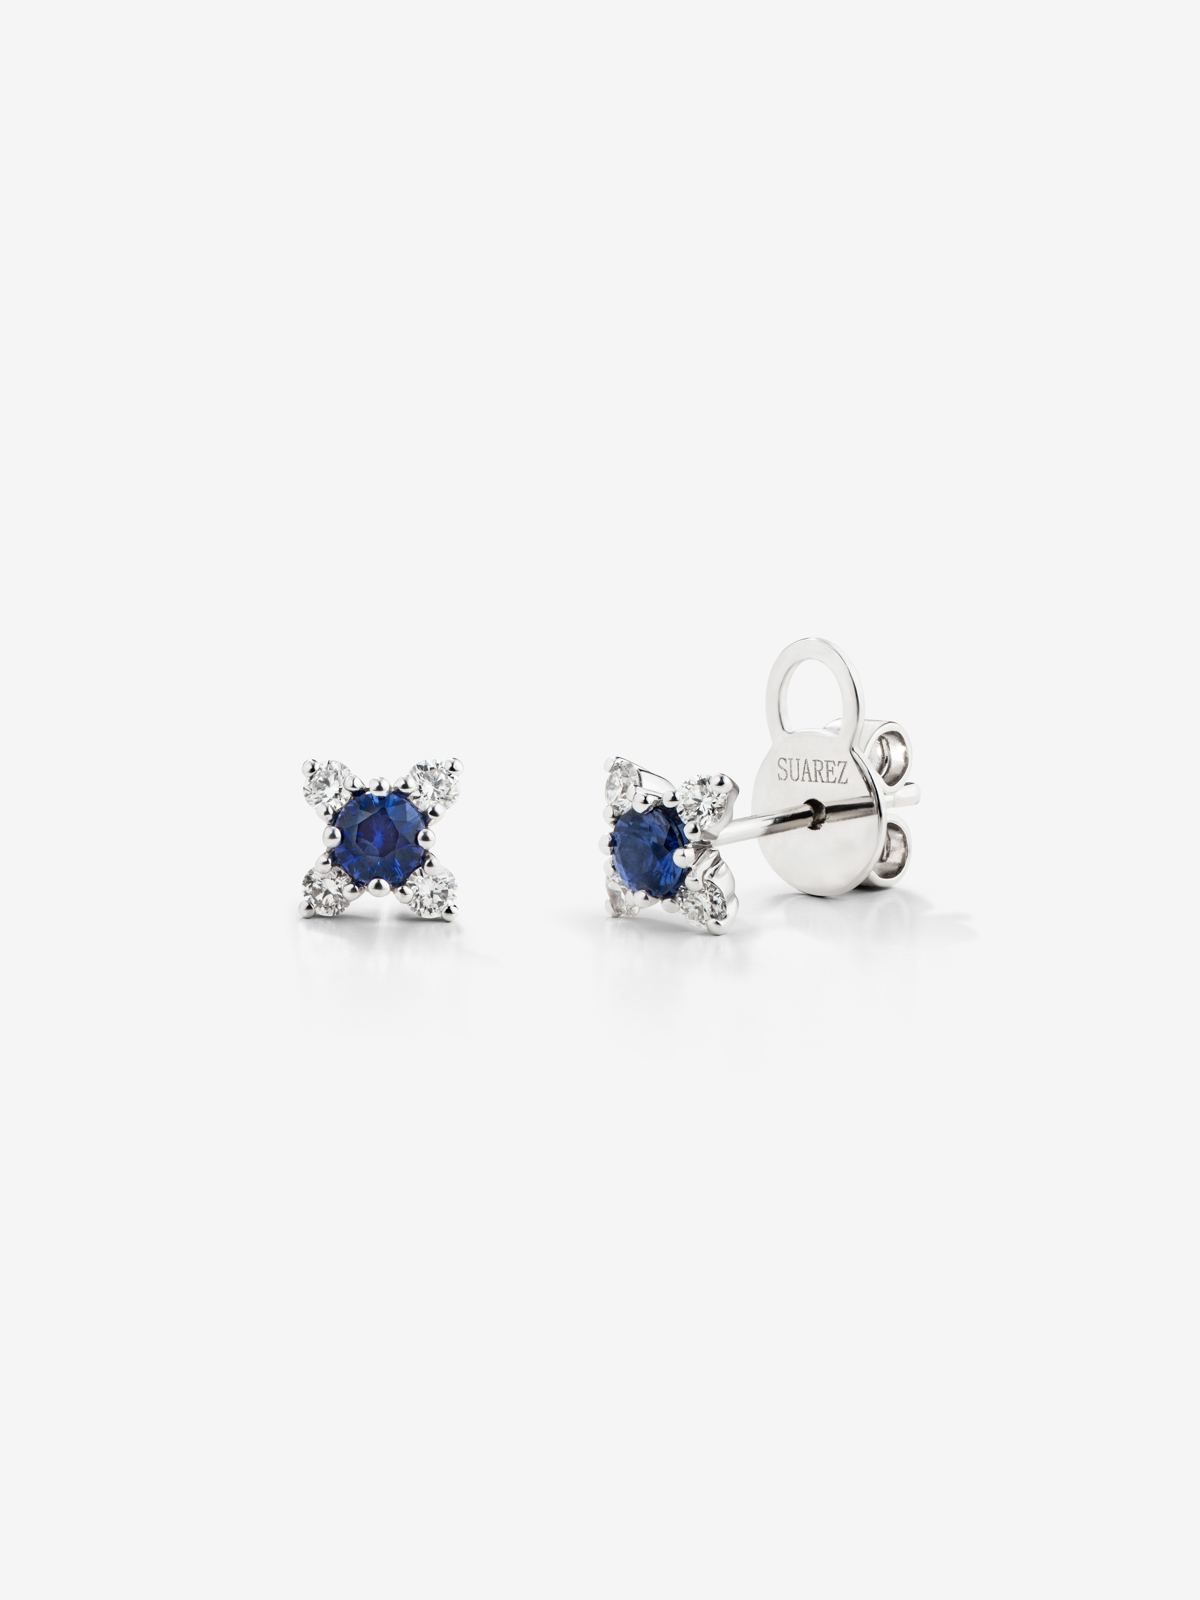 18K white gold flower earring with sapphire and diamonds.